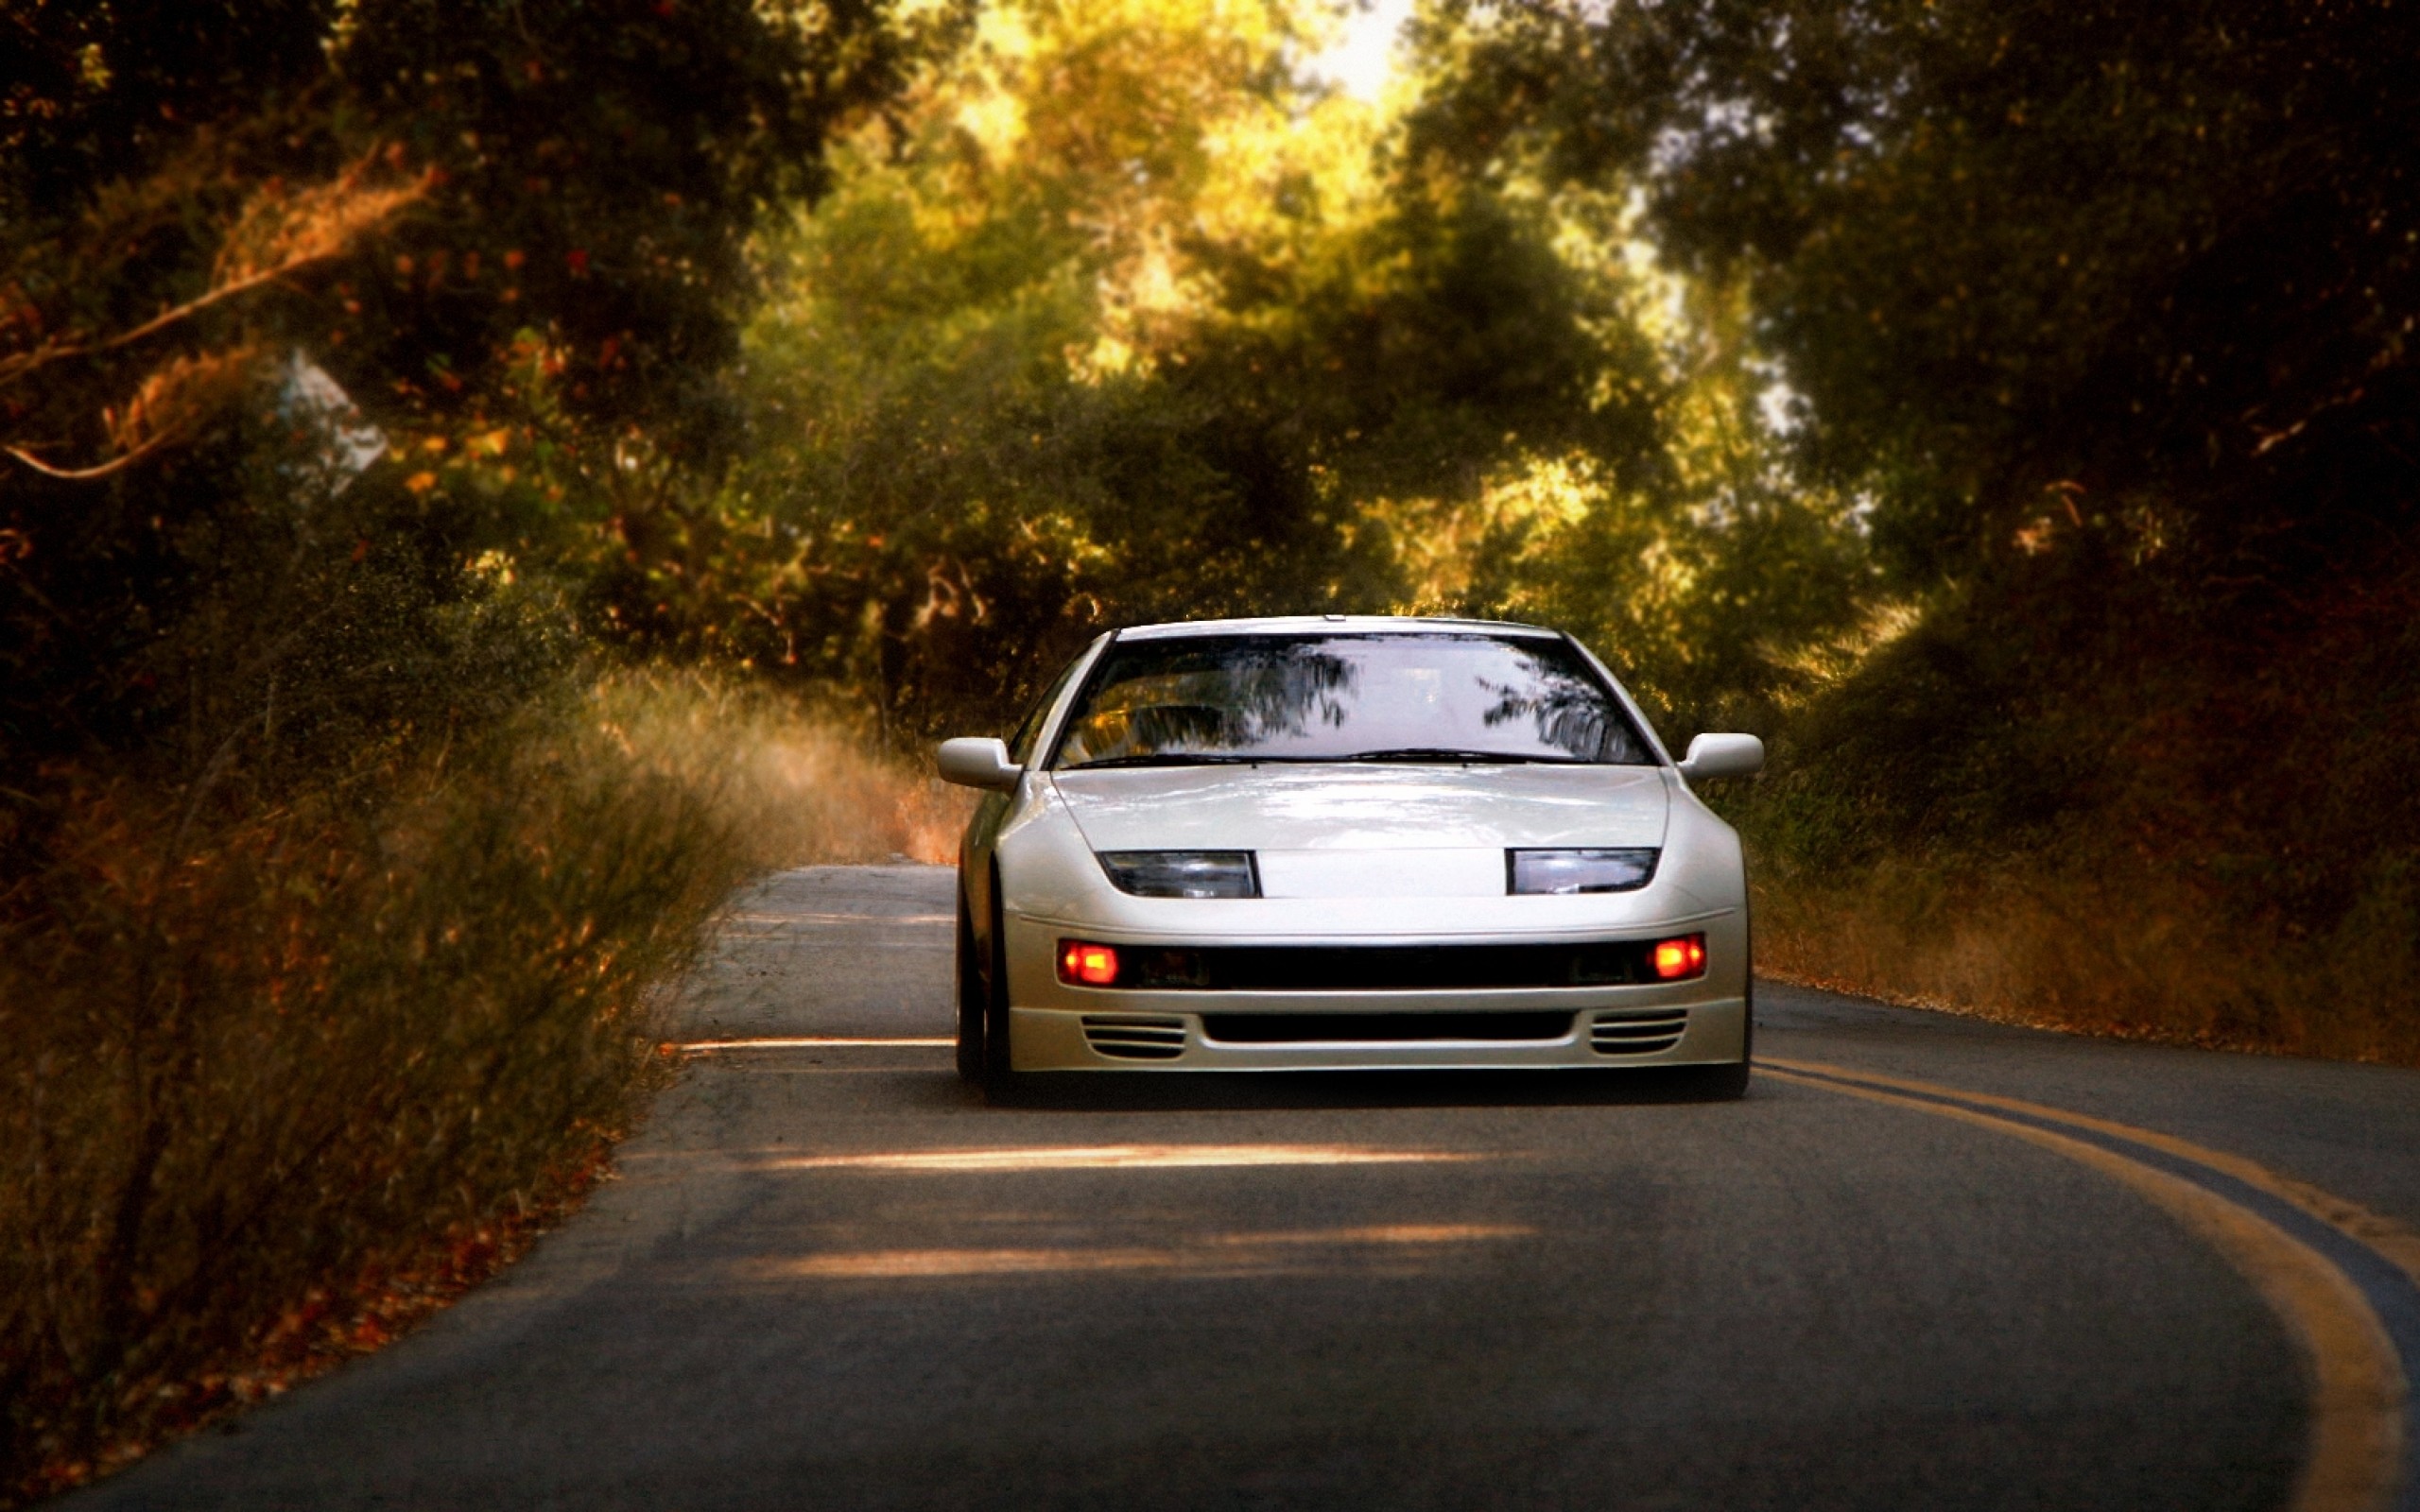 2560x1600 Nissan 300zx. Needs to be incorporated somewhere! | Cars | Pinterest |  Nissan 300zx, Nissan and Cars